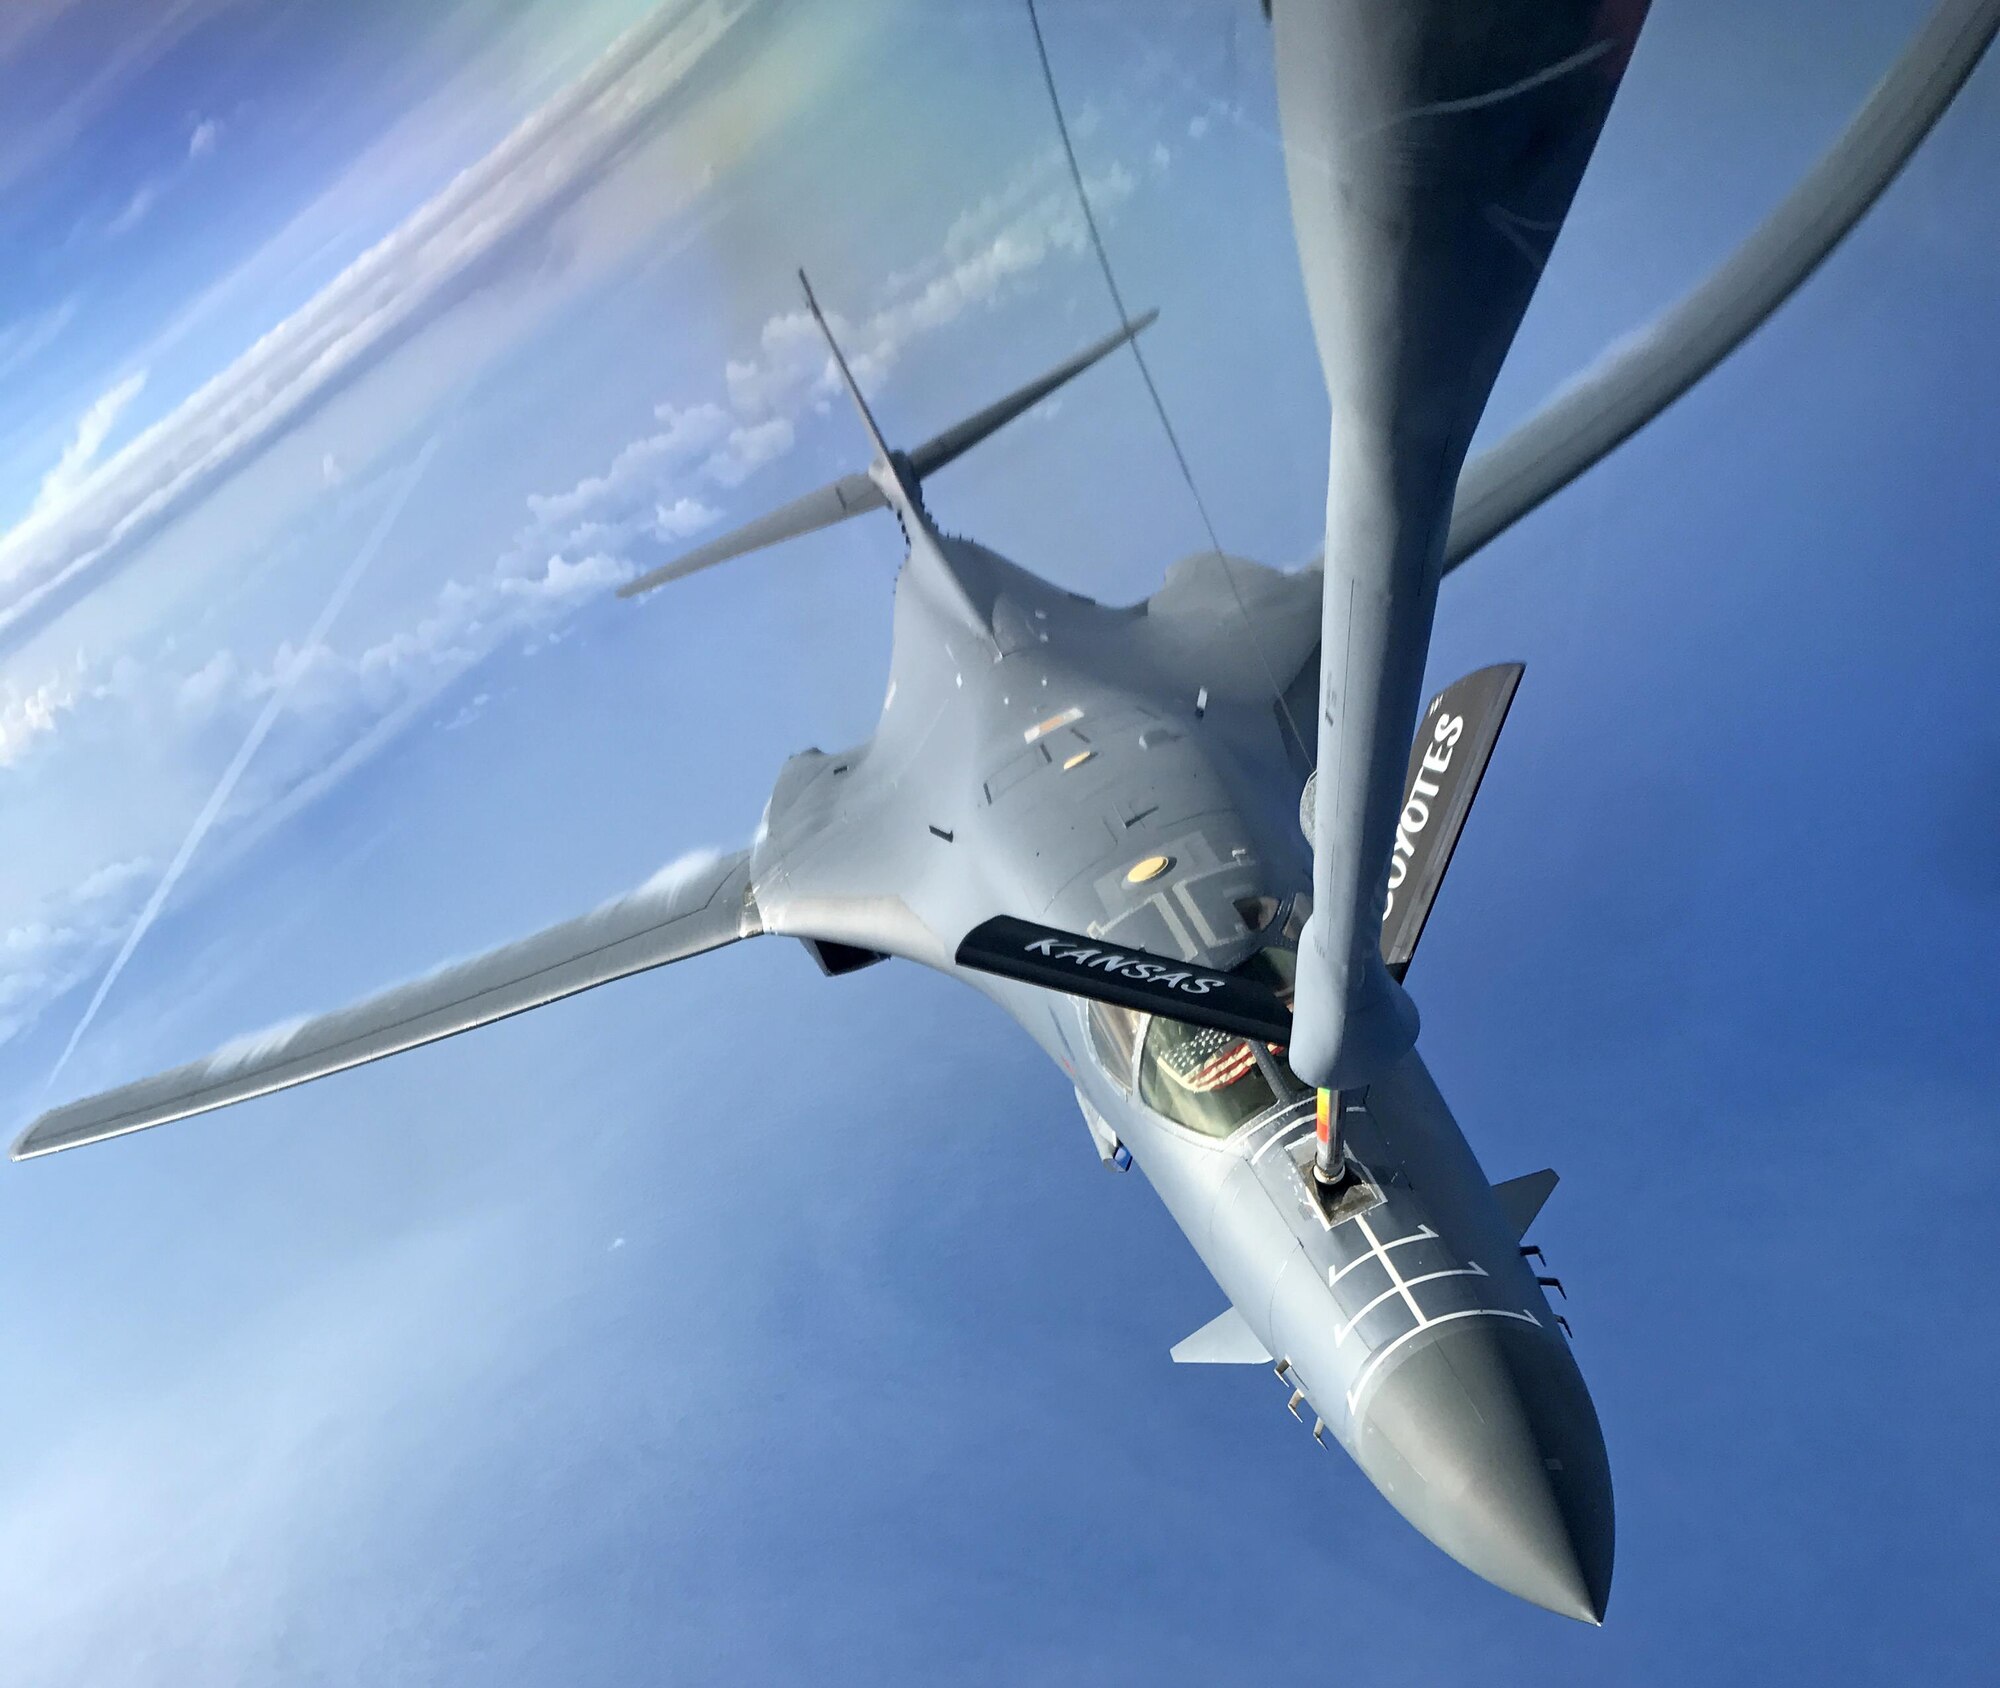 A U.S. Air Force B-1B Lancer assigned to the 9th Expeditionary Bomb Squadron, deployed from Dyess Air Force Base, Texas, flys a 10-hour mission from Andersen Air Force Base, Guam, in the vicinity of Kyushu, Japan, the East China Sea, and the Korean peninsula, operating with the Japan Air Self-Defense Force and Republic of Korea Air Force, June 20, 2017. These sequenced flights with Japan and the Republic of Korea demonstrate the solidarity and resolve we share with our allies, South Korea and Japan, to preserve peace and security in the Indo-Asia-Pacific. (U.S. Air Force photo/Airman 1st Class Gerald R. Willis)